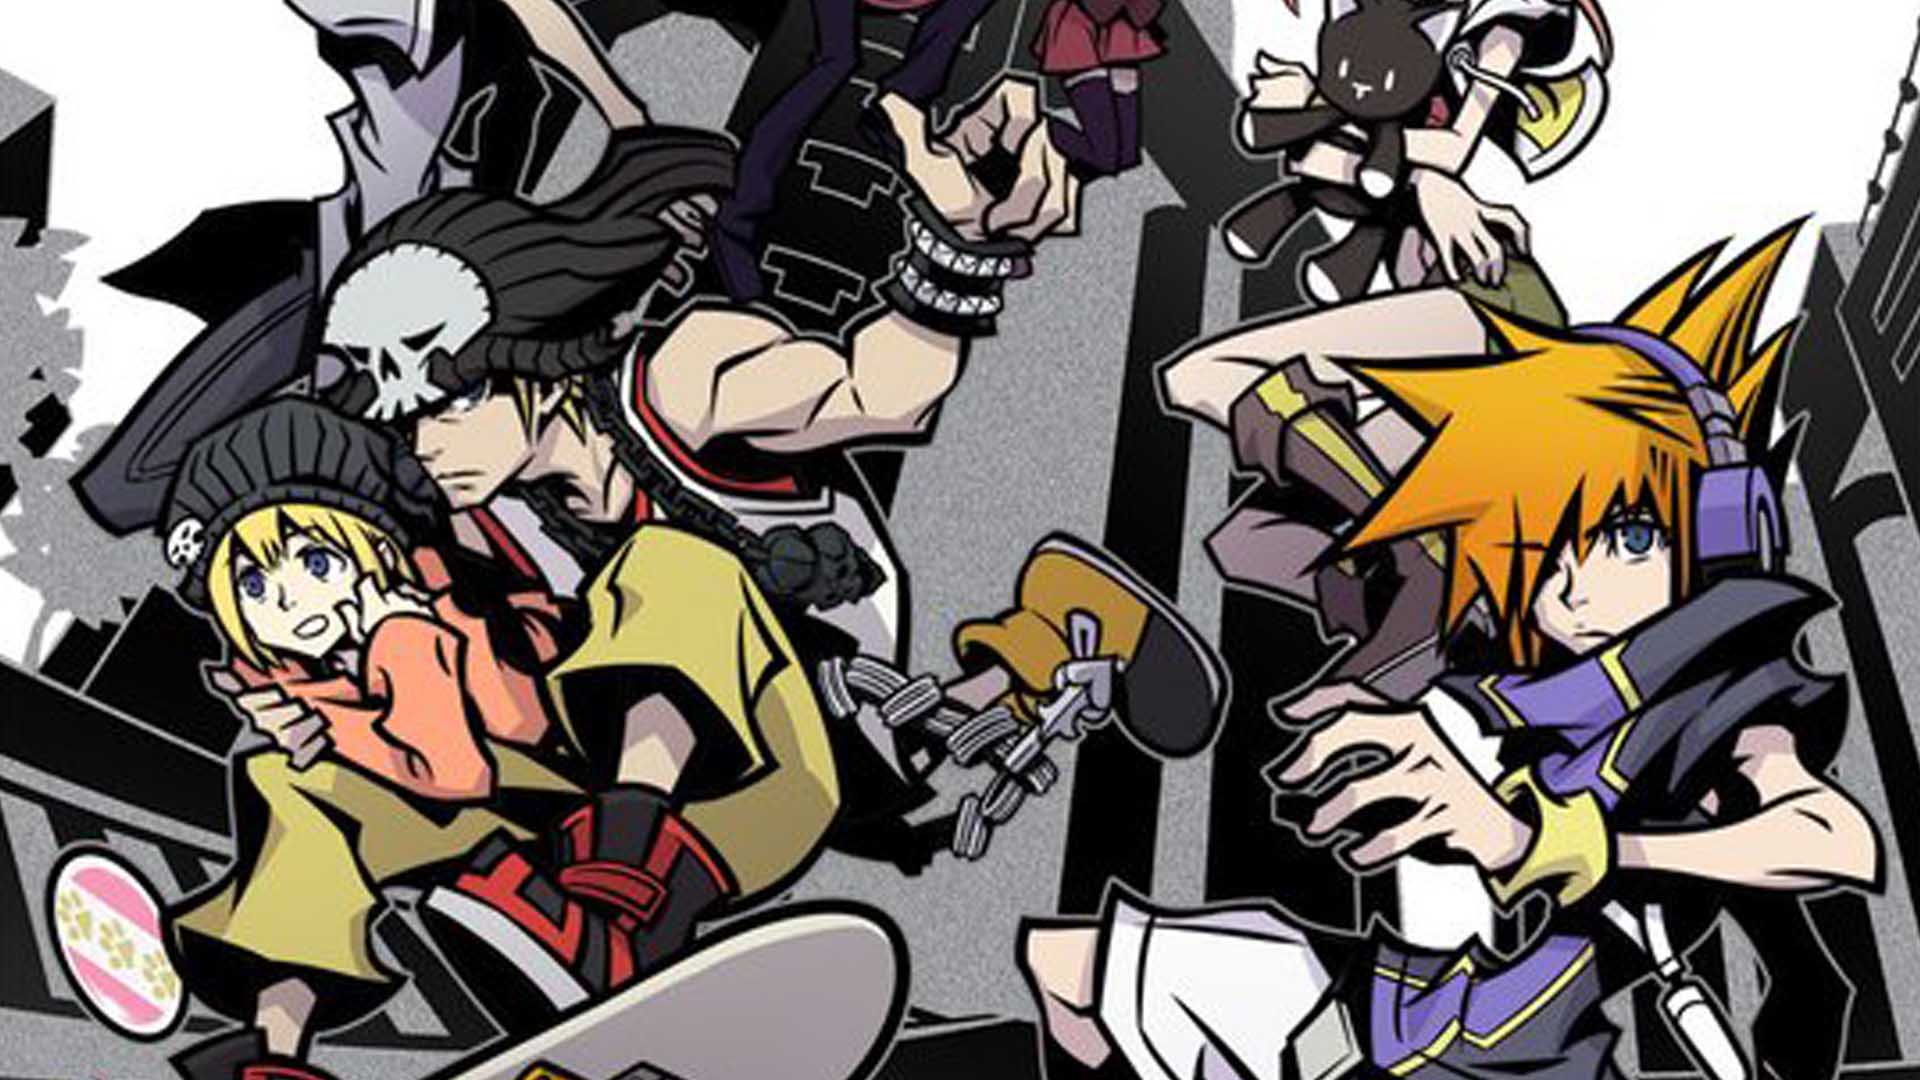 The World Ends With You features in Anime Expo 2020 art ...